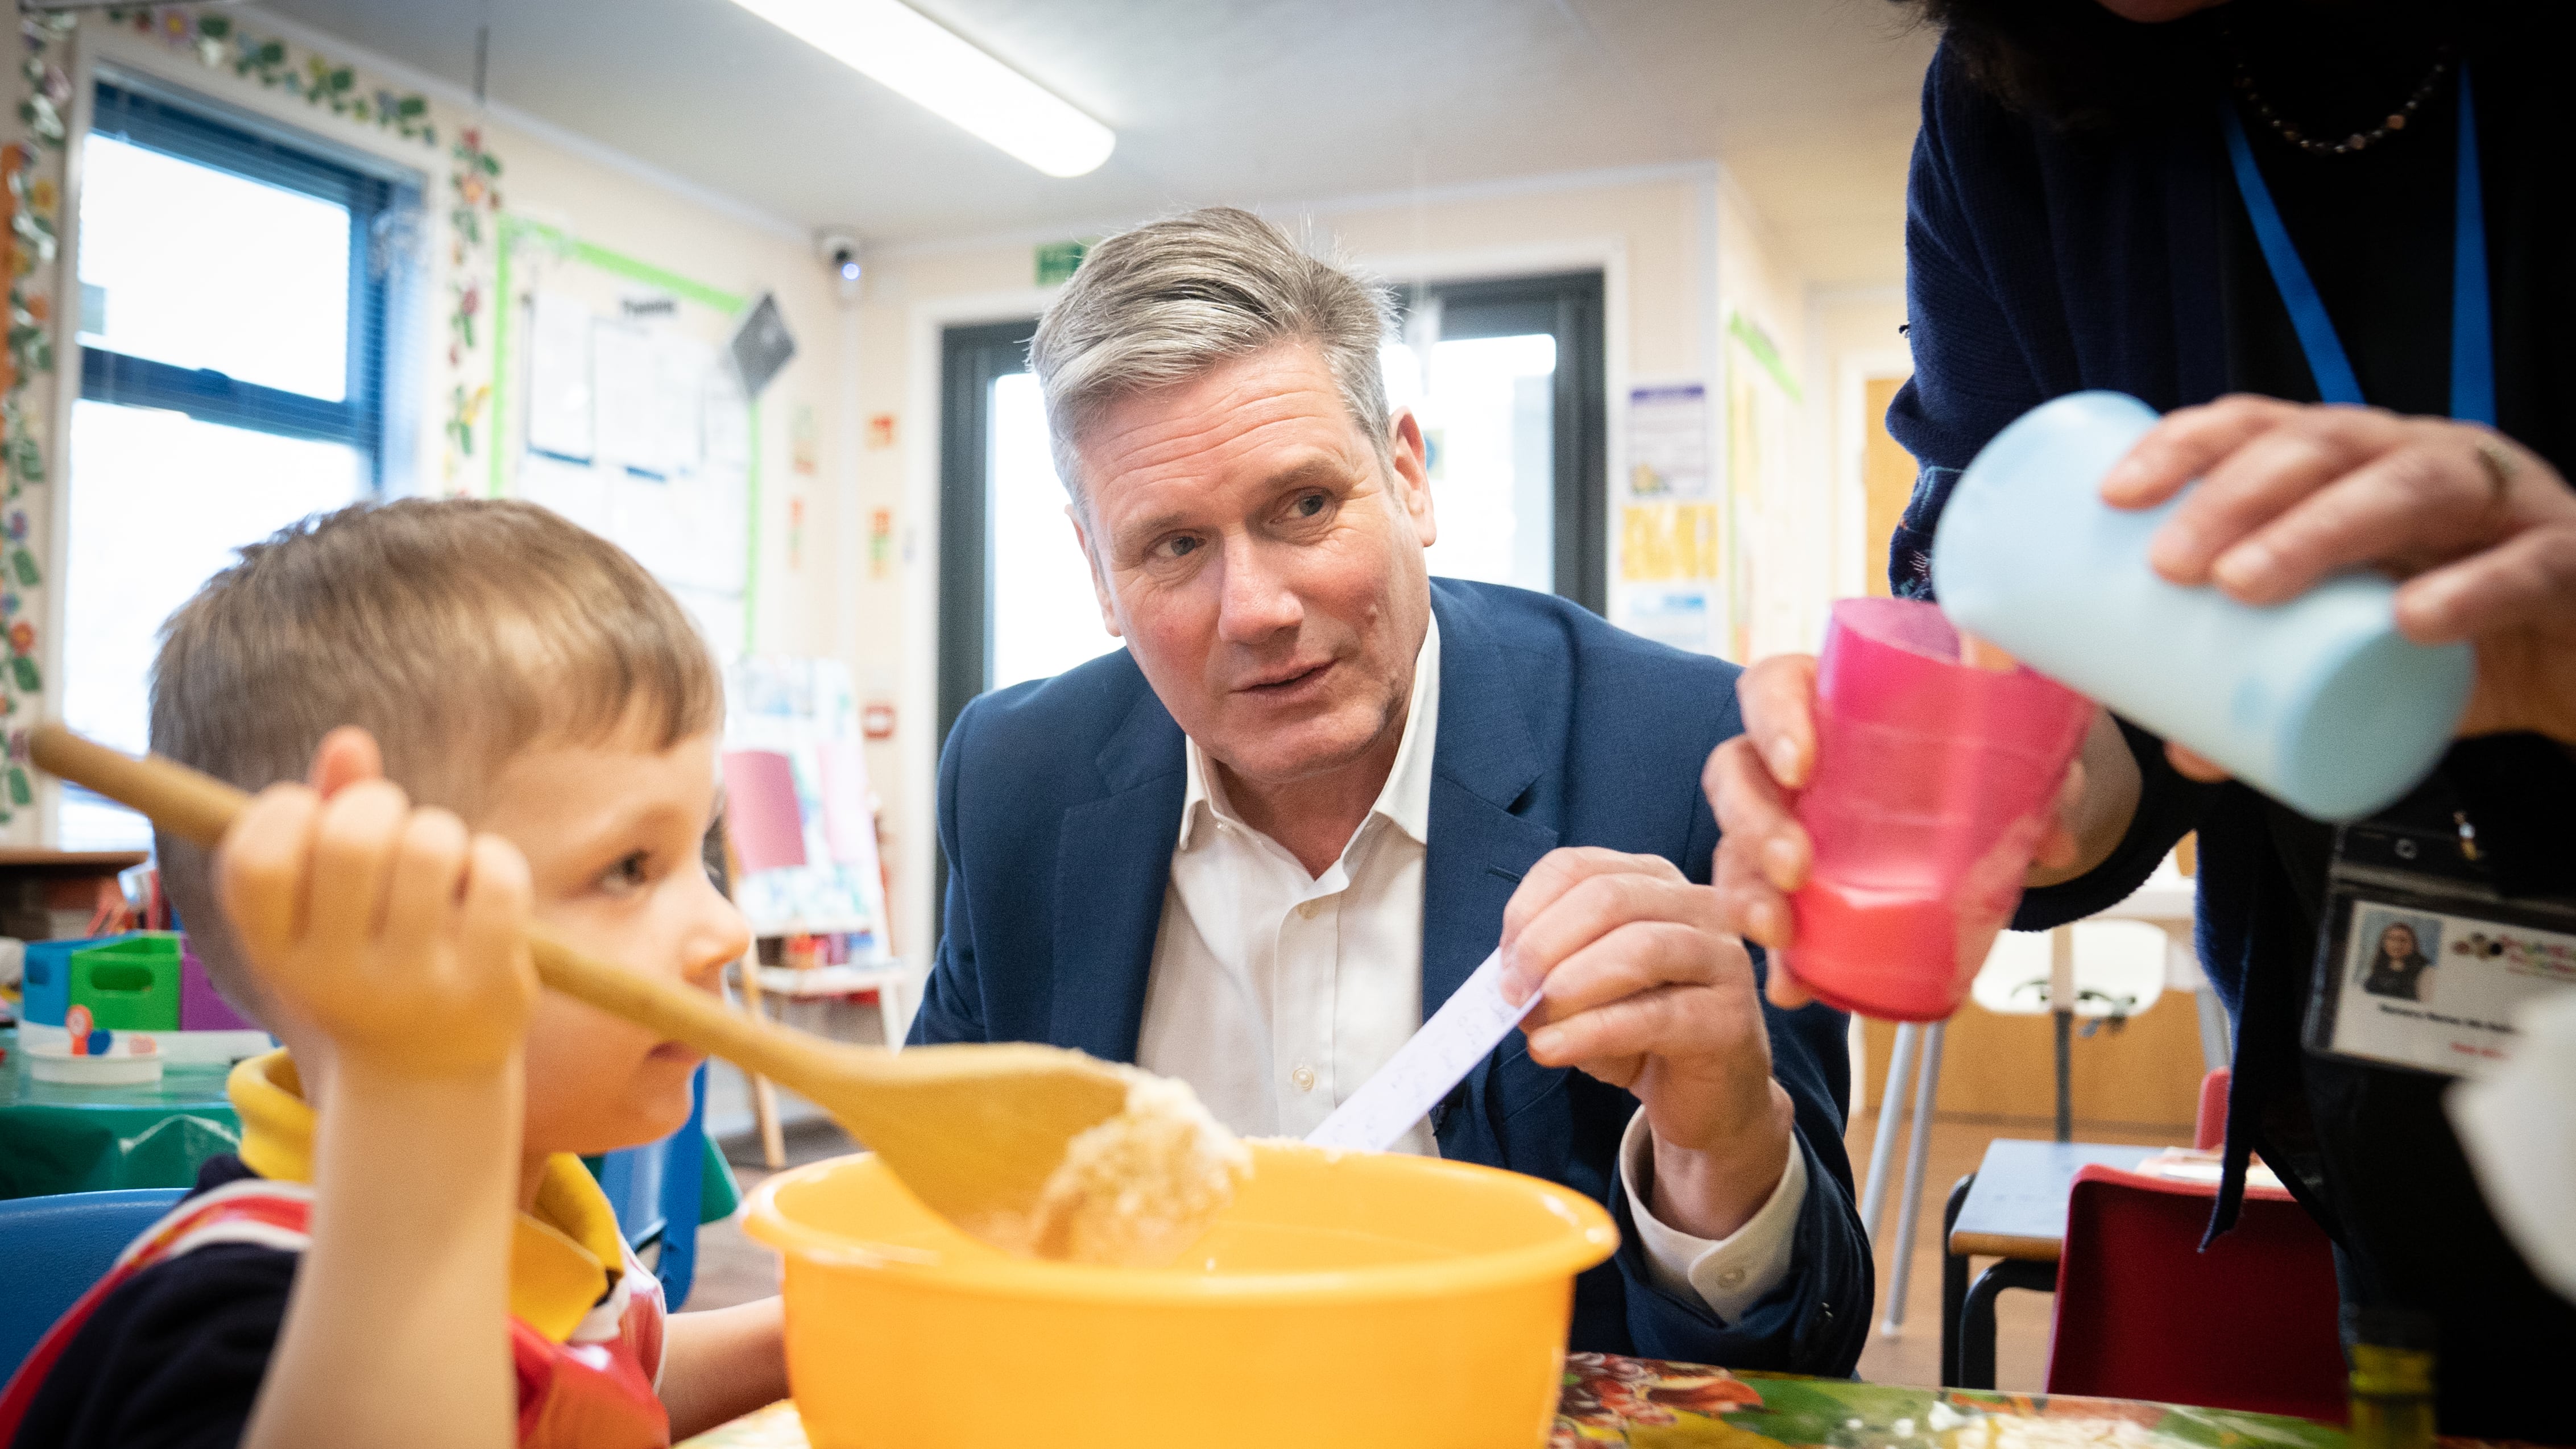 Labour leader Keir Starmer has set out plans to create 3,300 school-based nurseries